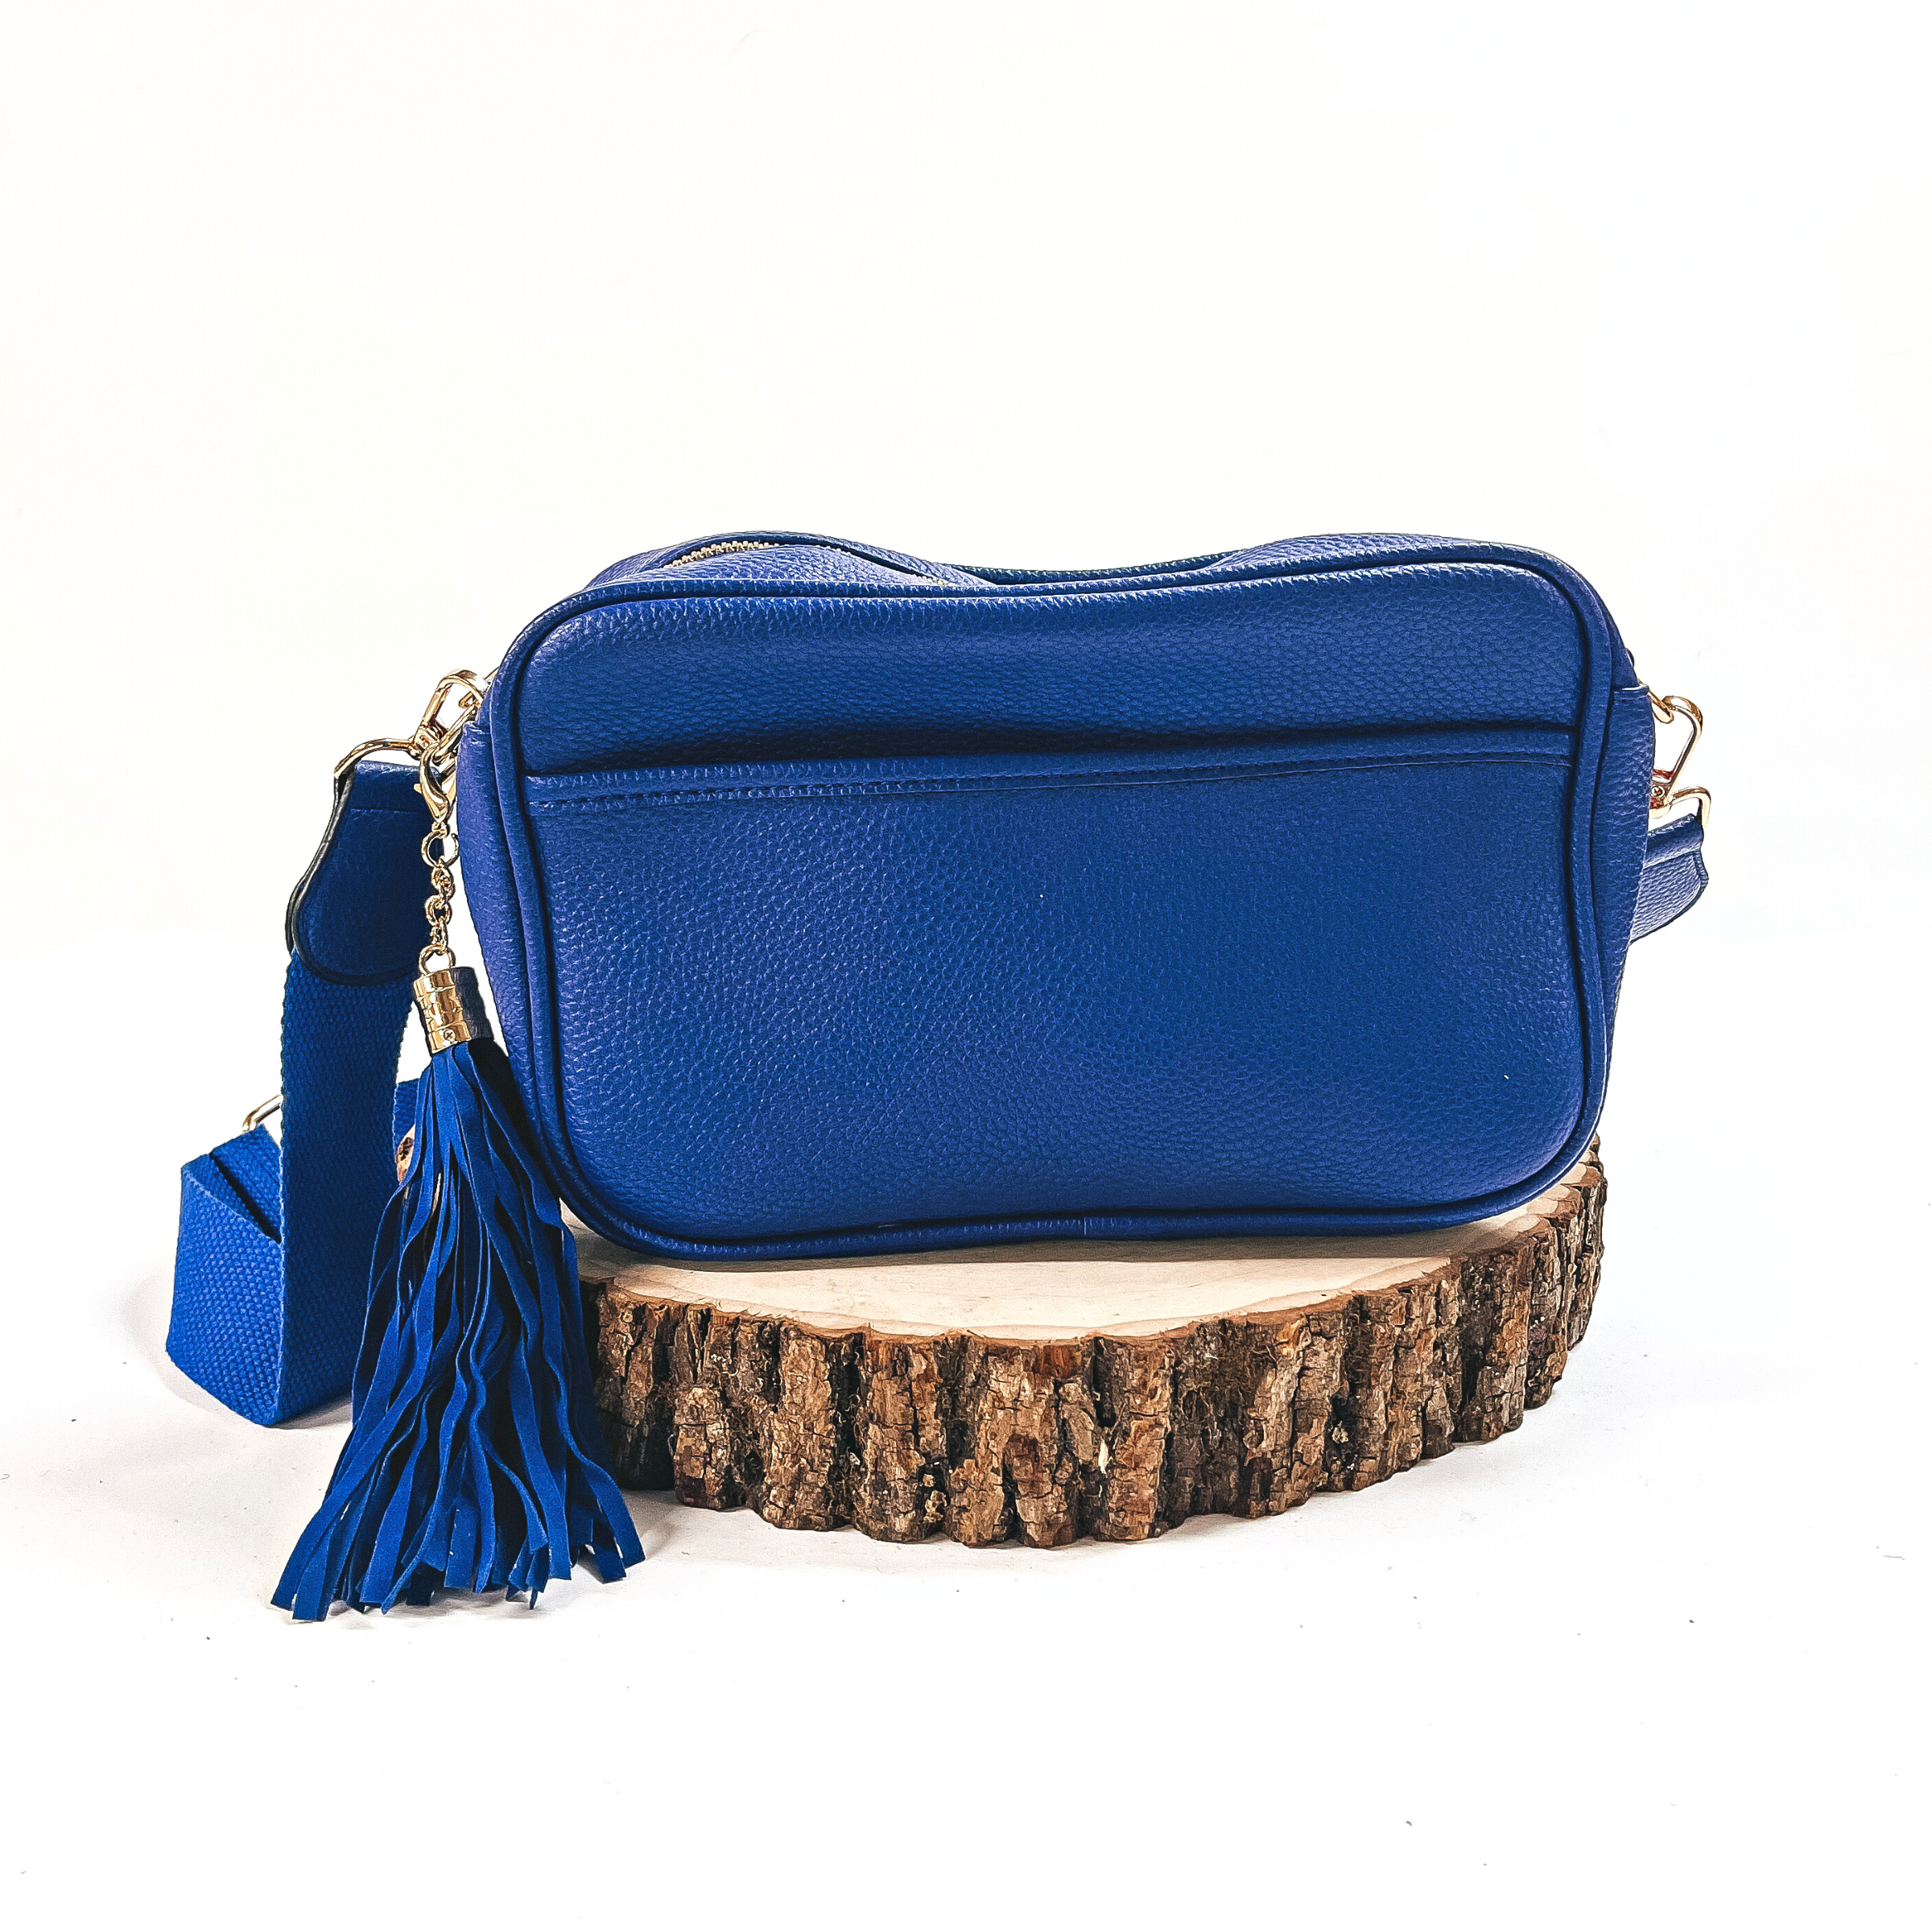 Lovin' Life Small Rectangle Crossbody Purse in Royal Blue - Giddy Up Glamour Boutique